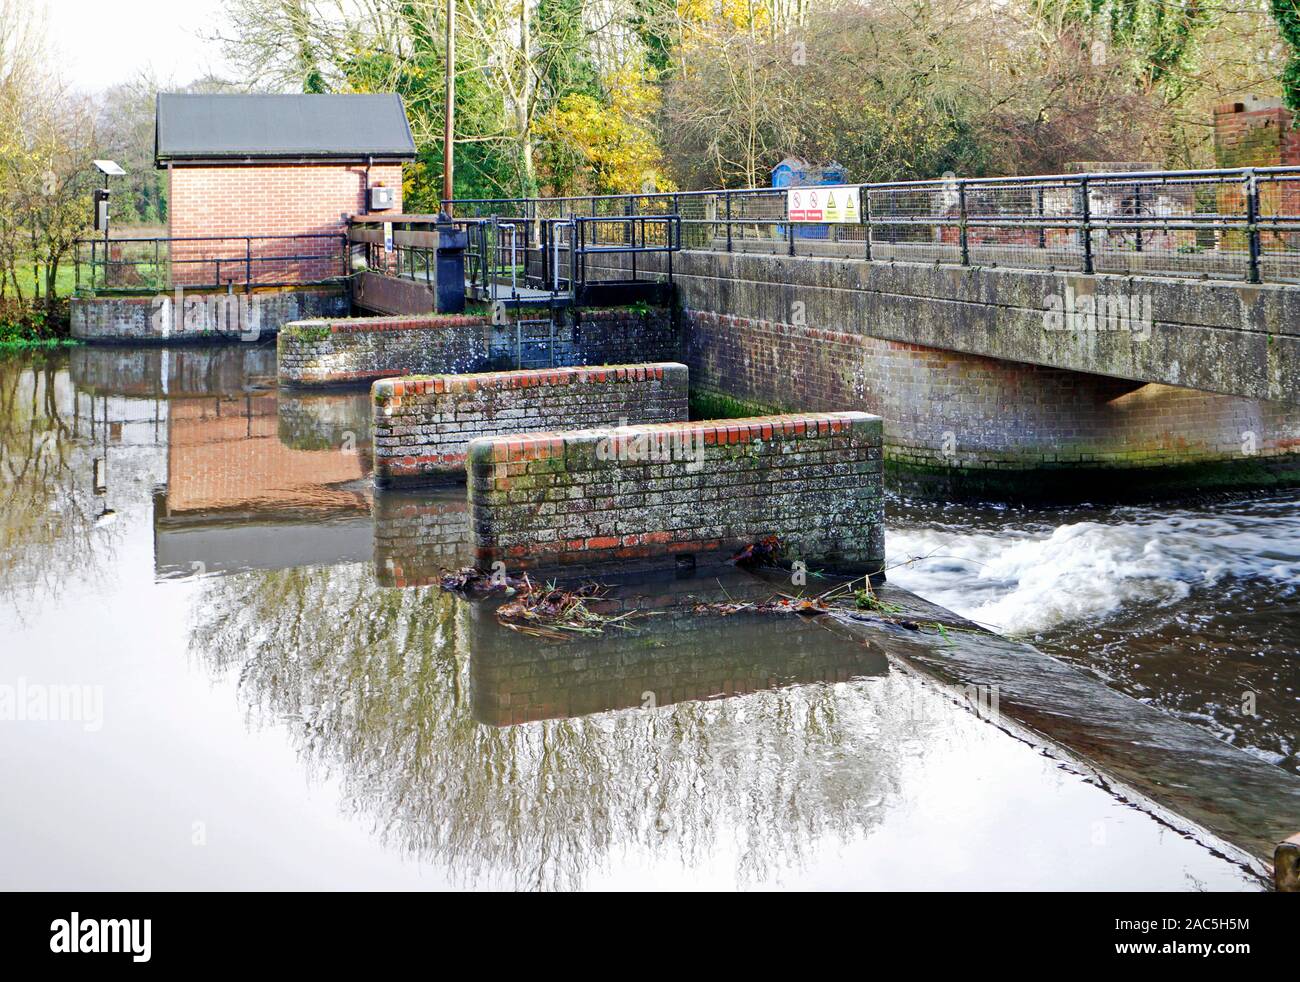 A weir and water gauging station on the River Bure by the remains of the old watermill at Horstead, Norfolk, England, United Kingdom, Europe. Stock Photo